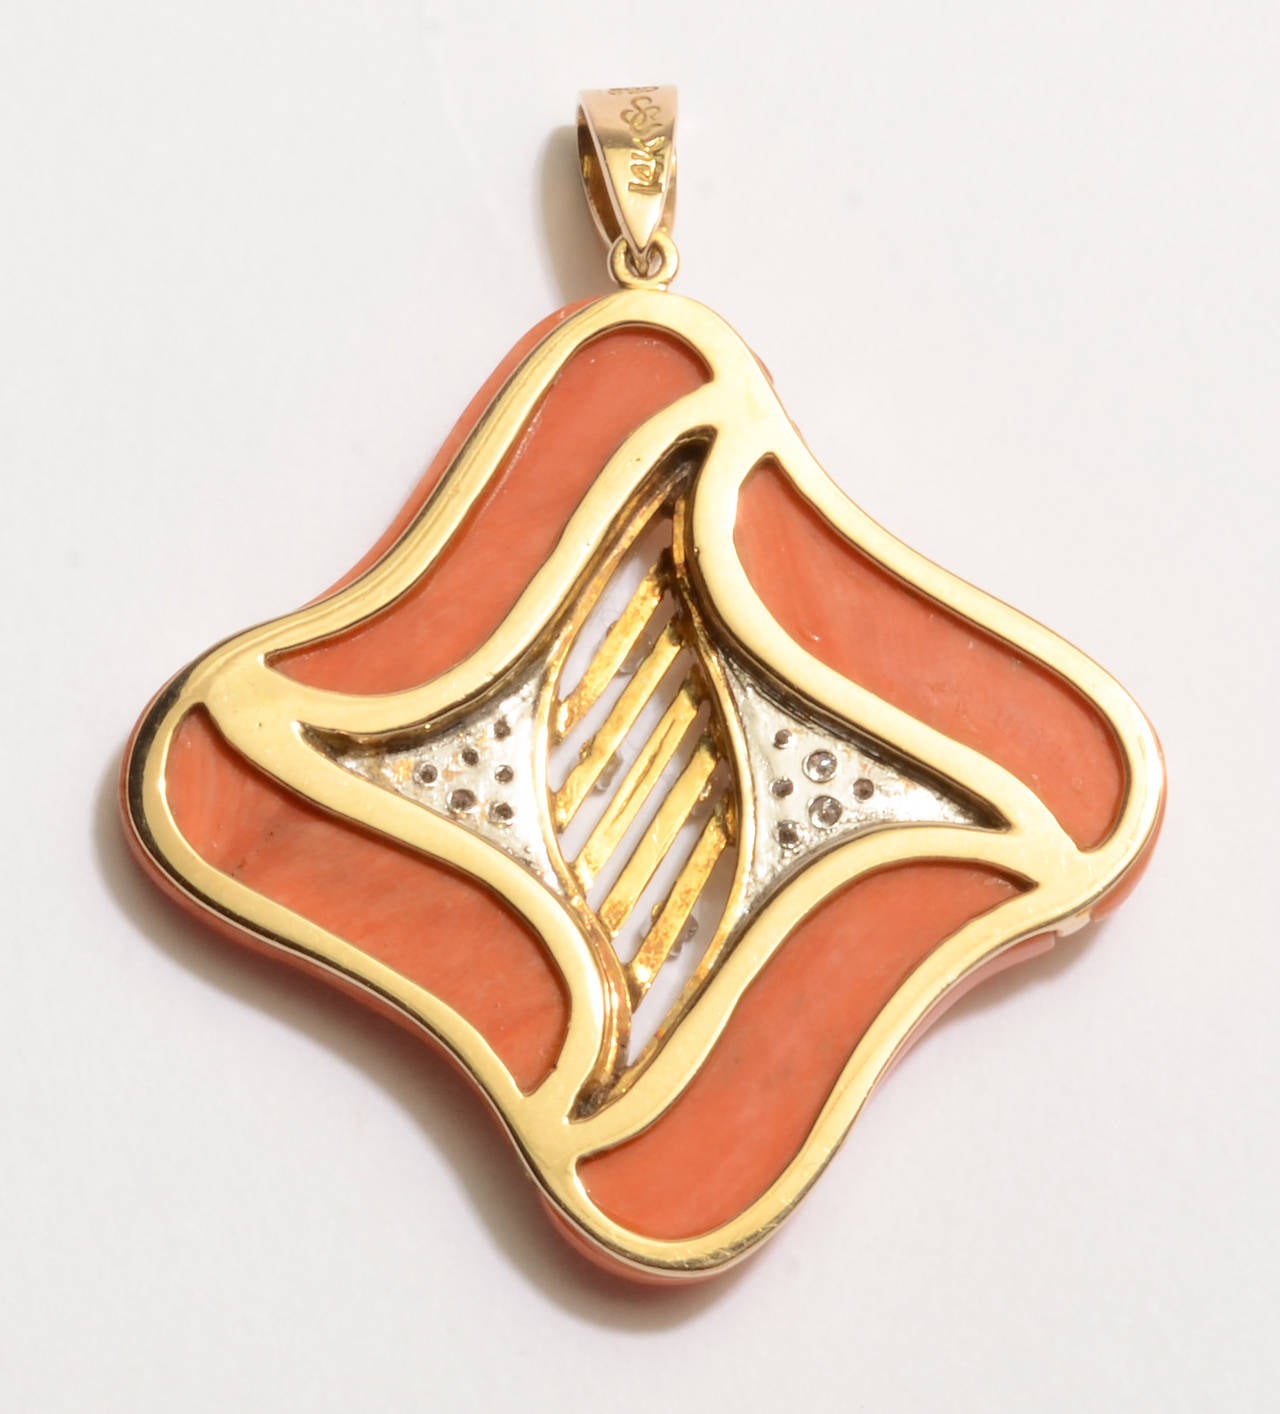 Curved edges of the coral and interior gold design make this  pendant especially graceful and unusual. Four diamonds in the interior follow through the pave settings on the sides. It measures 1 5/8